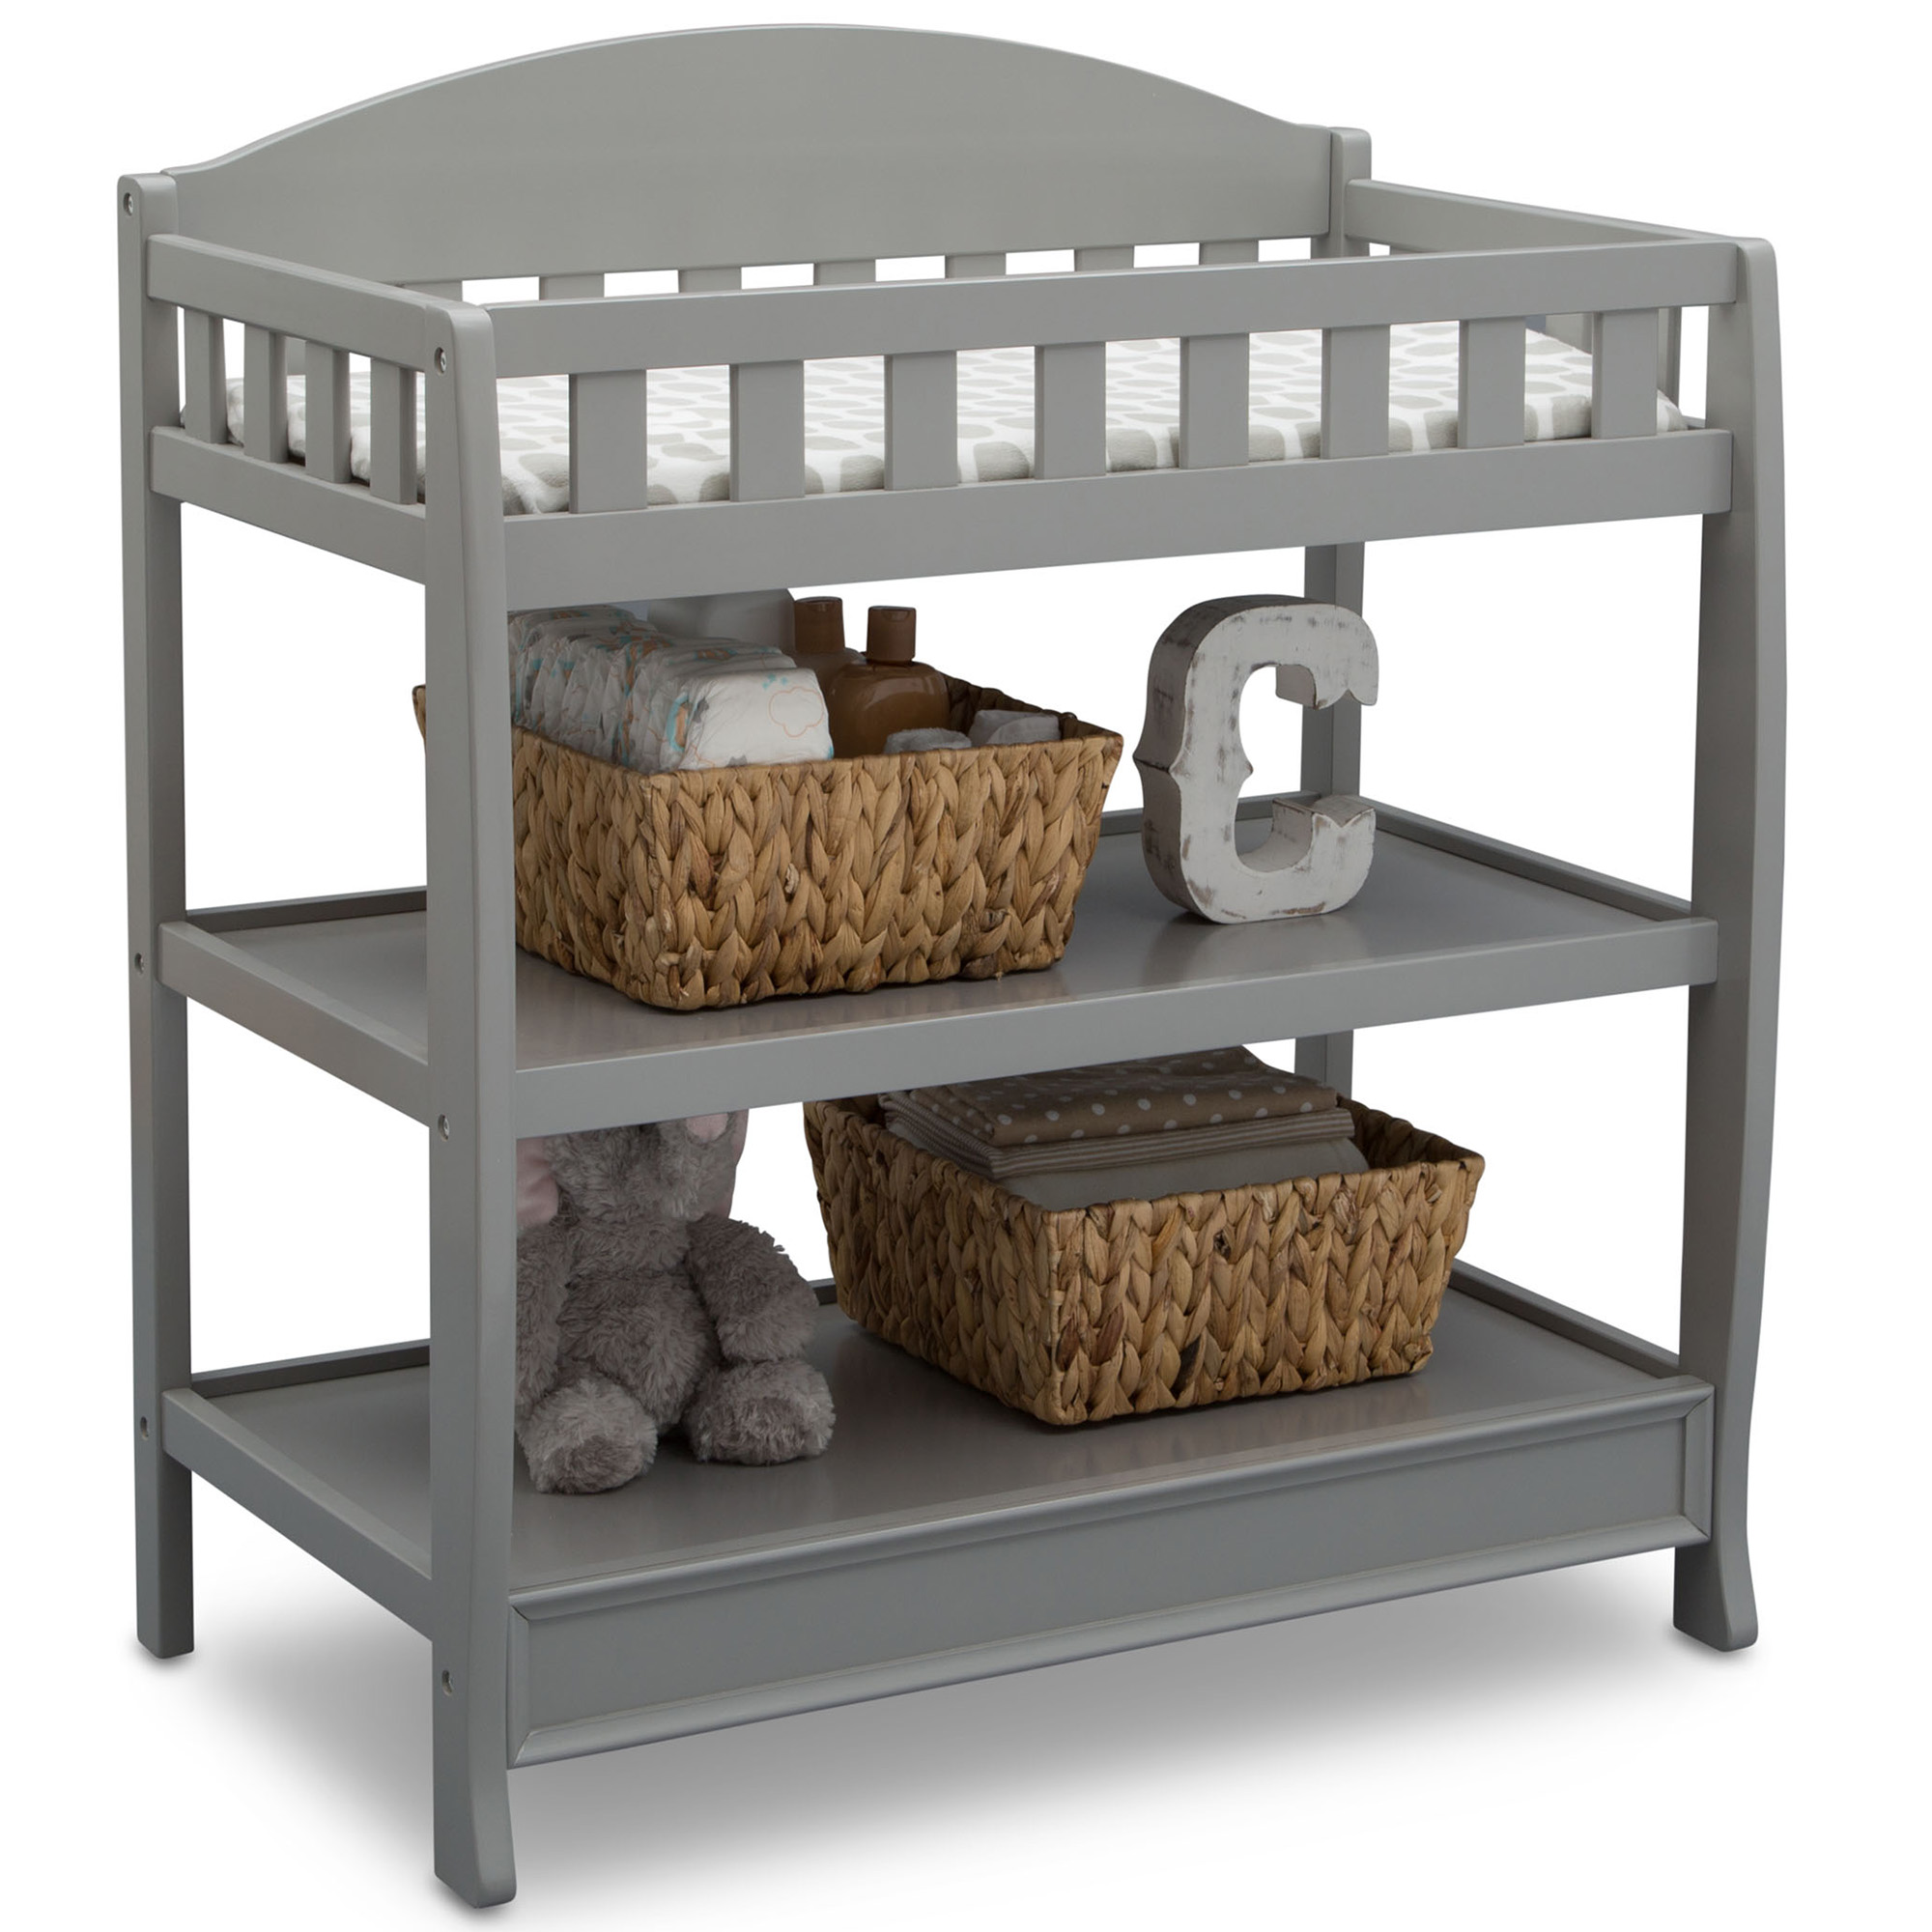 Delta Children Wilmington Changing Table with Pad, Grey - image 4 of 6